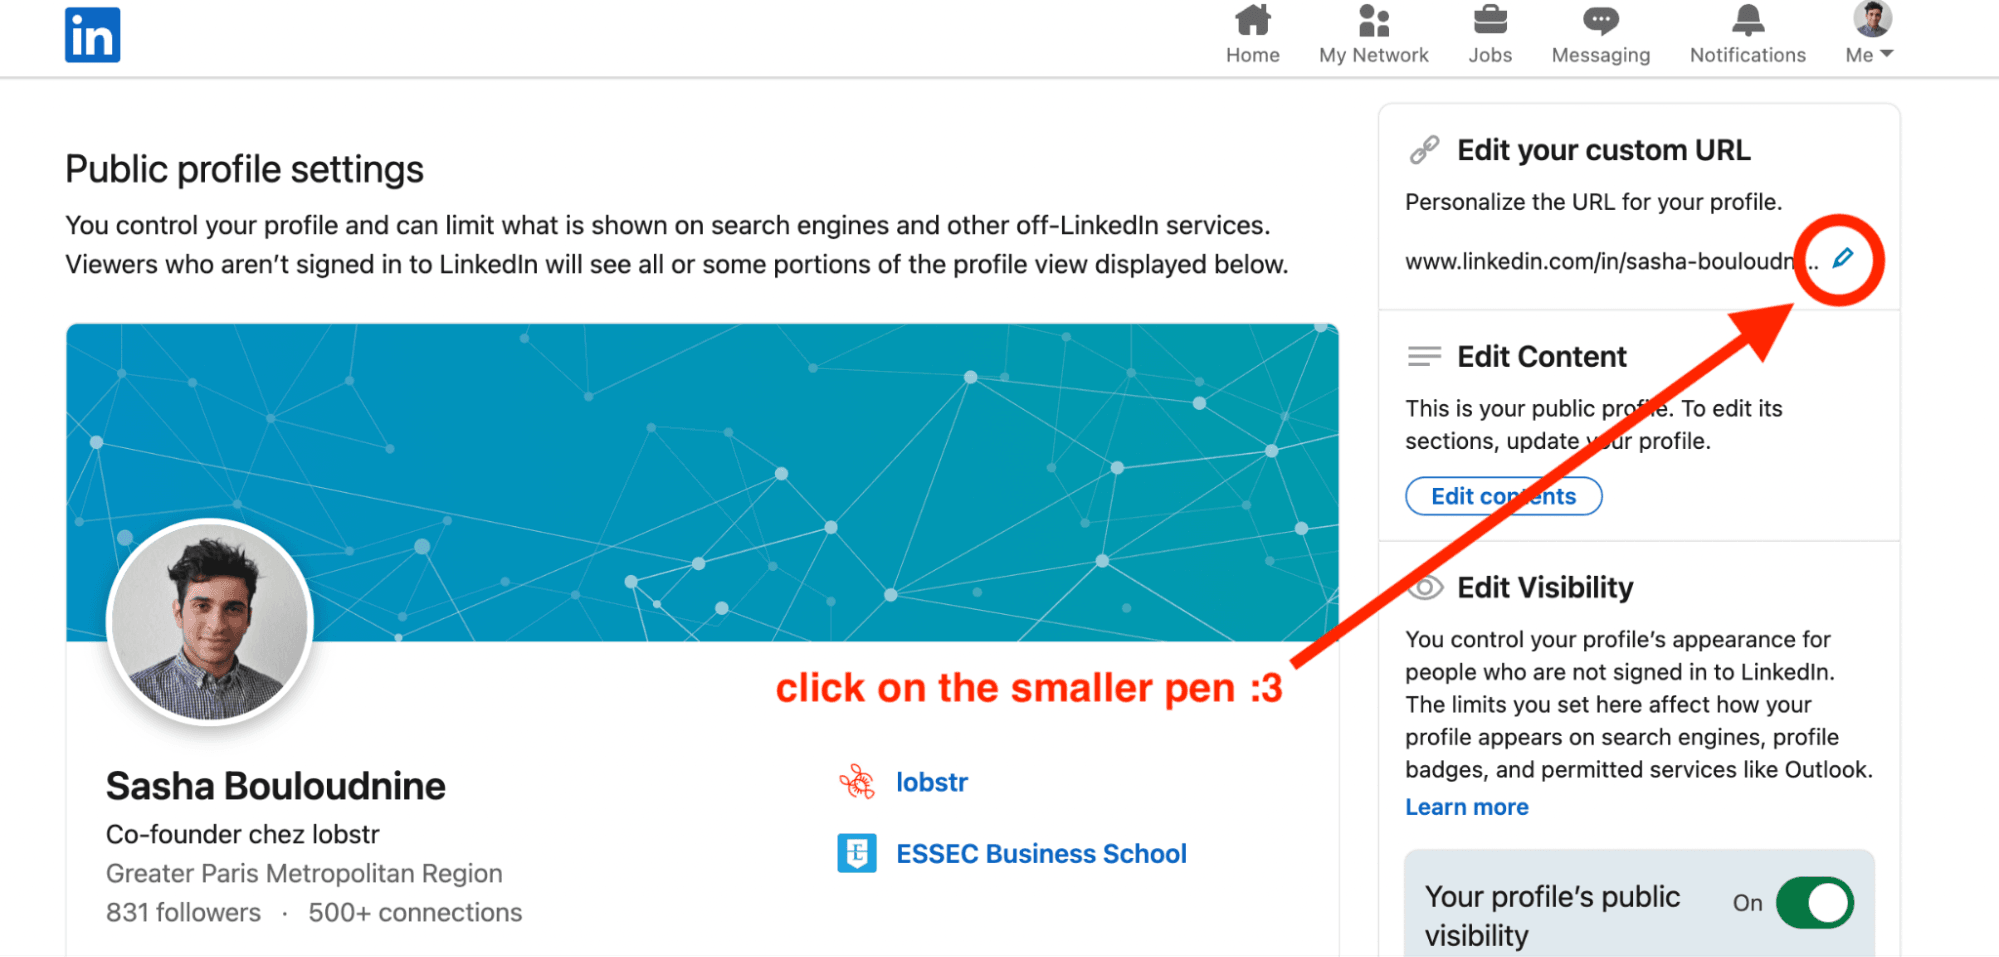 click on the top righ pencil icon to update your linkedin url - image14.png